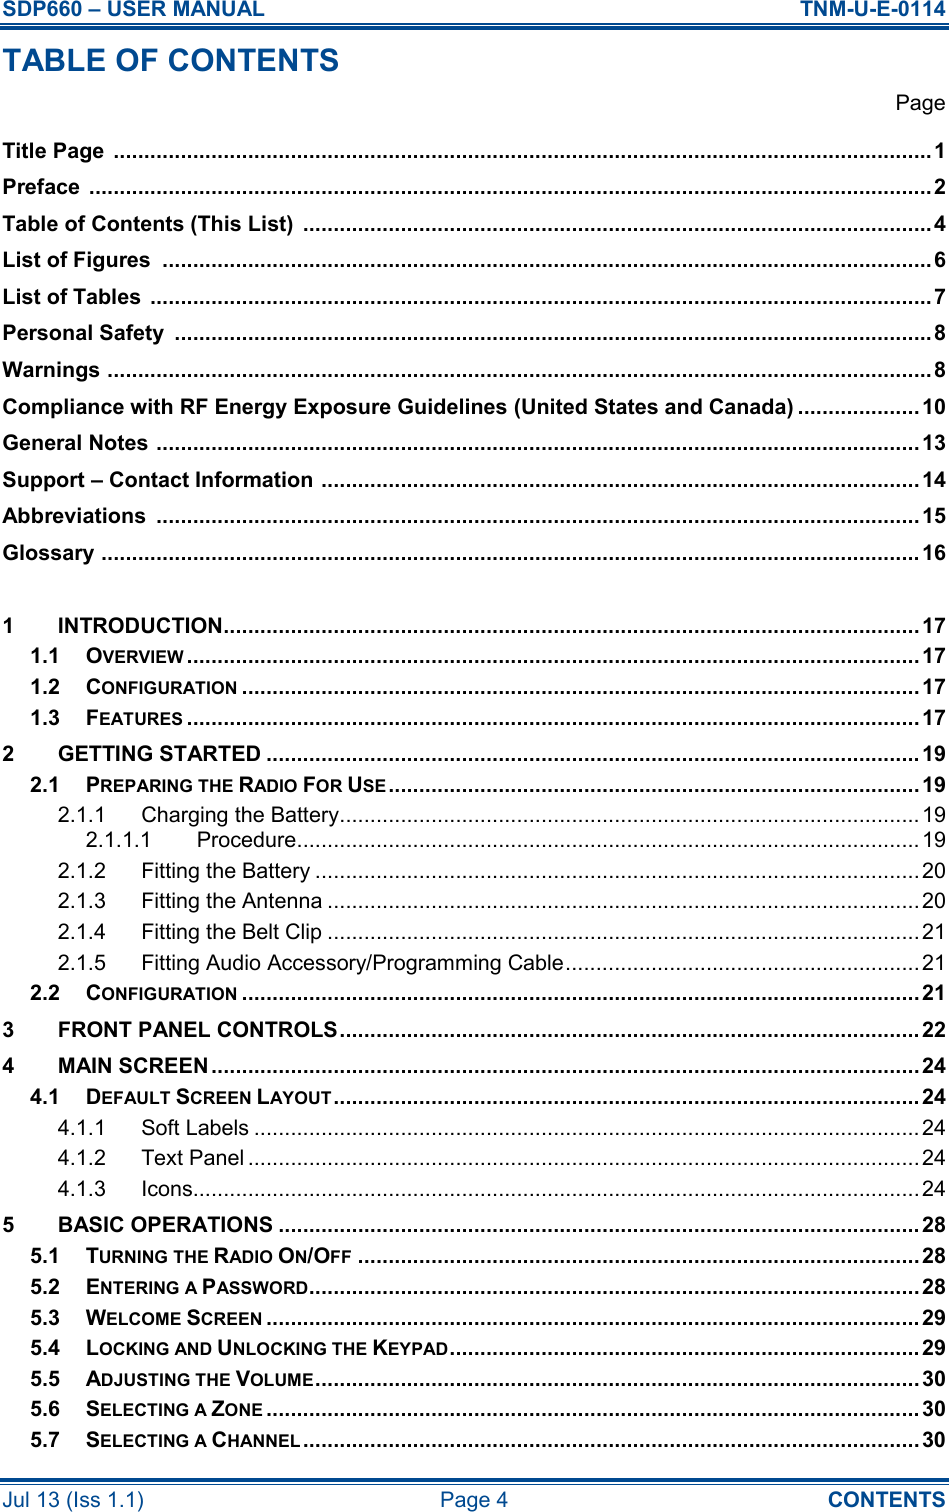 SDP660 – USER MANUAL  TNM-U-E-0114 Jul 13 (Iss 1.1)  Page 4  CONTENTS TABLE OF CONTENTS   Page Title Page  ......................................................................................................................................1 Preface  .......................................................................................................................................... 2 Table of Contents (This List)  ....................................................................................................... 4 List of Figures  ..............................................................................................................................6 List of Tables  ................................................................................................................................ 7 Personal Safety  ............................................................................................................................8 Warnings ....................................................................................................................................... 8 Compliance with RF Energy Exposure Guidelines (United States and Canada) ....................10 General Notes ............................................................................................................................. 13 Support – Contact Information .................................................................................................. 14 Abbreviations  .............................................................................................................................15 Glossary ...................................................................................................................................... 16  1 INTRODUCTION..................................................................................................................17 1.1 OVERVIEW........................................................................................................................17 1.2 CONFIGURATION...............................................................................................................17 1.3 FEATURES........................................................................................................................17 2 GETTING STARTED ........................................................................................................... 19 2.1 PREPARING THE RADIO FOR USE....................................................................................... 19 2.1.1 Charging the Battery............................................................................................... 19 2.1.1.1 Procedure...................................................................................................... 19 2.1.2 Fitting the Battery ...................................................................................................20 2.1.3 Fitting the Antenna .................................................................................................20 2.1.4 Fitting the Belt Clip .................................................................................................21 2.1.5 Fitting Audio Accessory/Programming Cable..........................................................21 2.2 CONFIGURATION...............................................................................................................21 3 FRONT PANEL CONTROLS............................................................................................... 22 4 MAIN SCREEN....................................................................................................................24 4.1 DEFAULT SCREEN LAYOUT................................................................................................ 24 4.1.1 Soft Labels ............................................................................................................. 24 4.1.2 Text Panel ..............................................................................................................24 4.1.3 Icons....................................................................................................................... 24 5 BASIC OPERATIONS ......................................................................................................... 28 5.1 TURNING THE RADIO ON/OFF............................................................................................28 5.2 ENTERING A PASSWORD.................................................................................................... 28 5.3 WELCOME SCREEN........................................................................................................... 29 5.4 LOCKING AND UNLOCKING THE KEYPAD............................................................................. 29 5.5 ADJUSTING THE VOLUME...................................................................................................30 5.6 SELECTING A ZONE........................................................................................................... 30 5.7 SELECTING A CHANNEL..................................................................................................... 30 